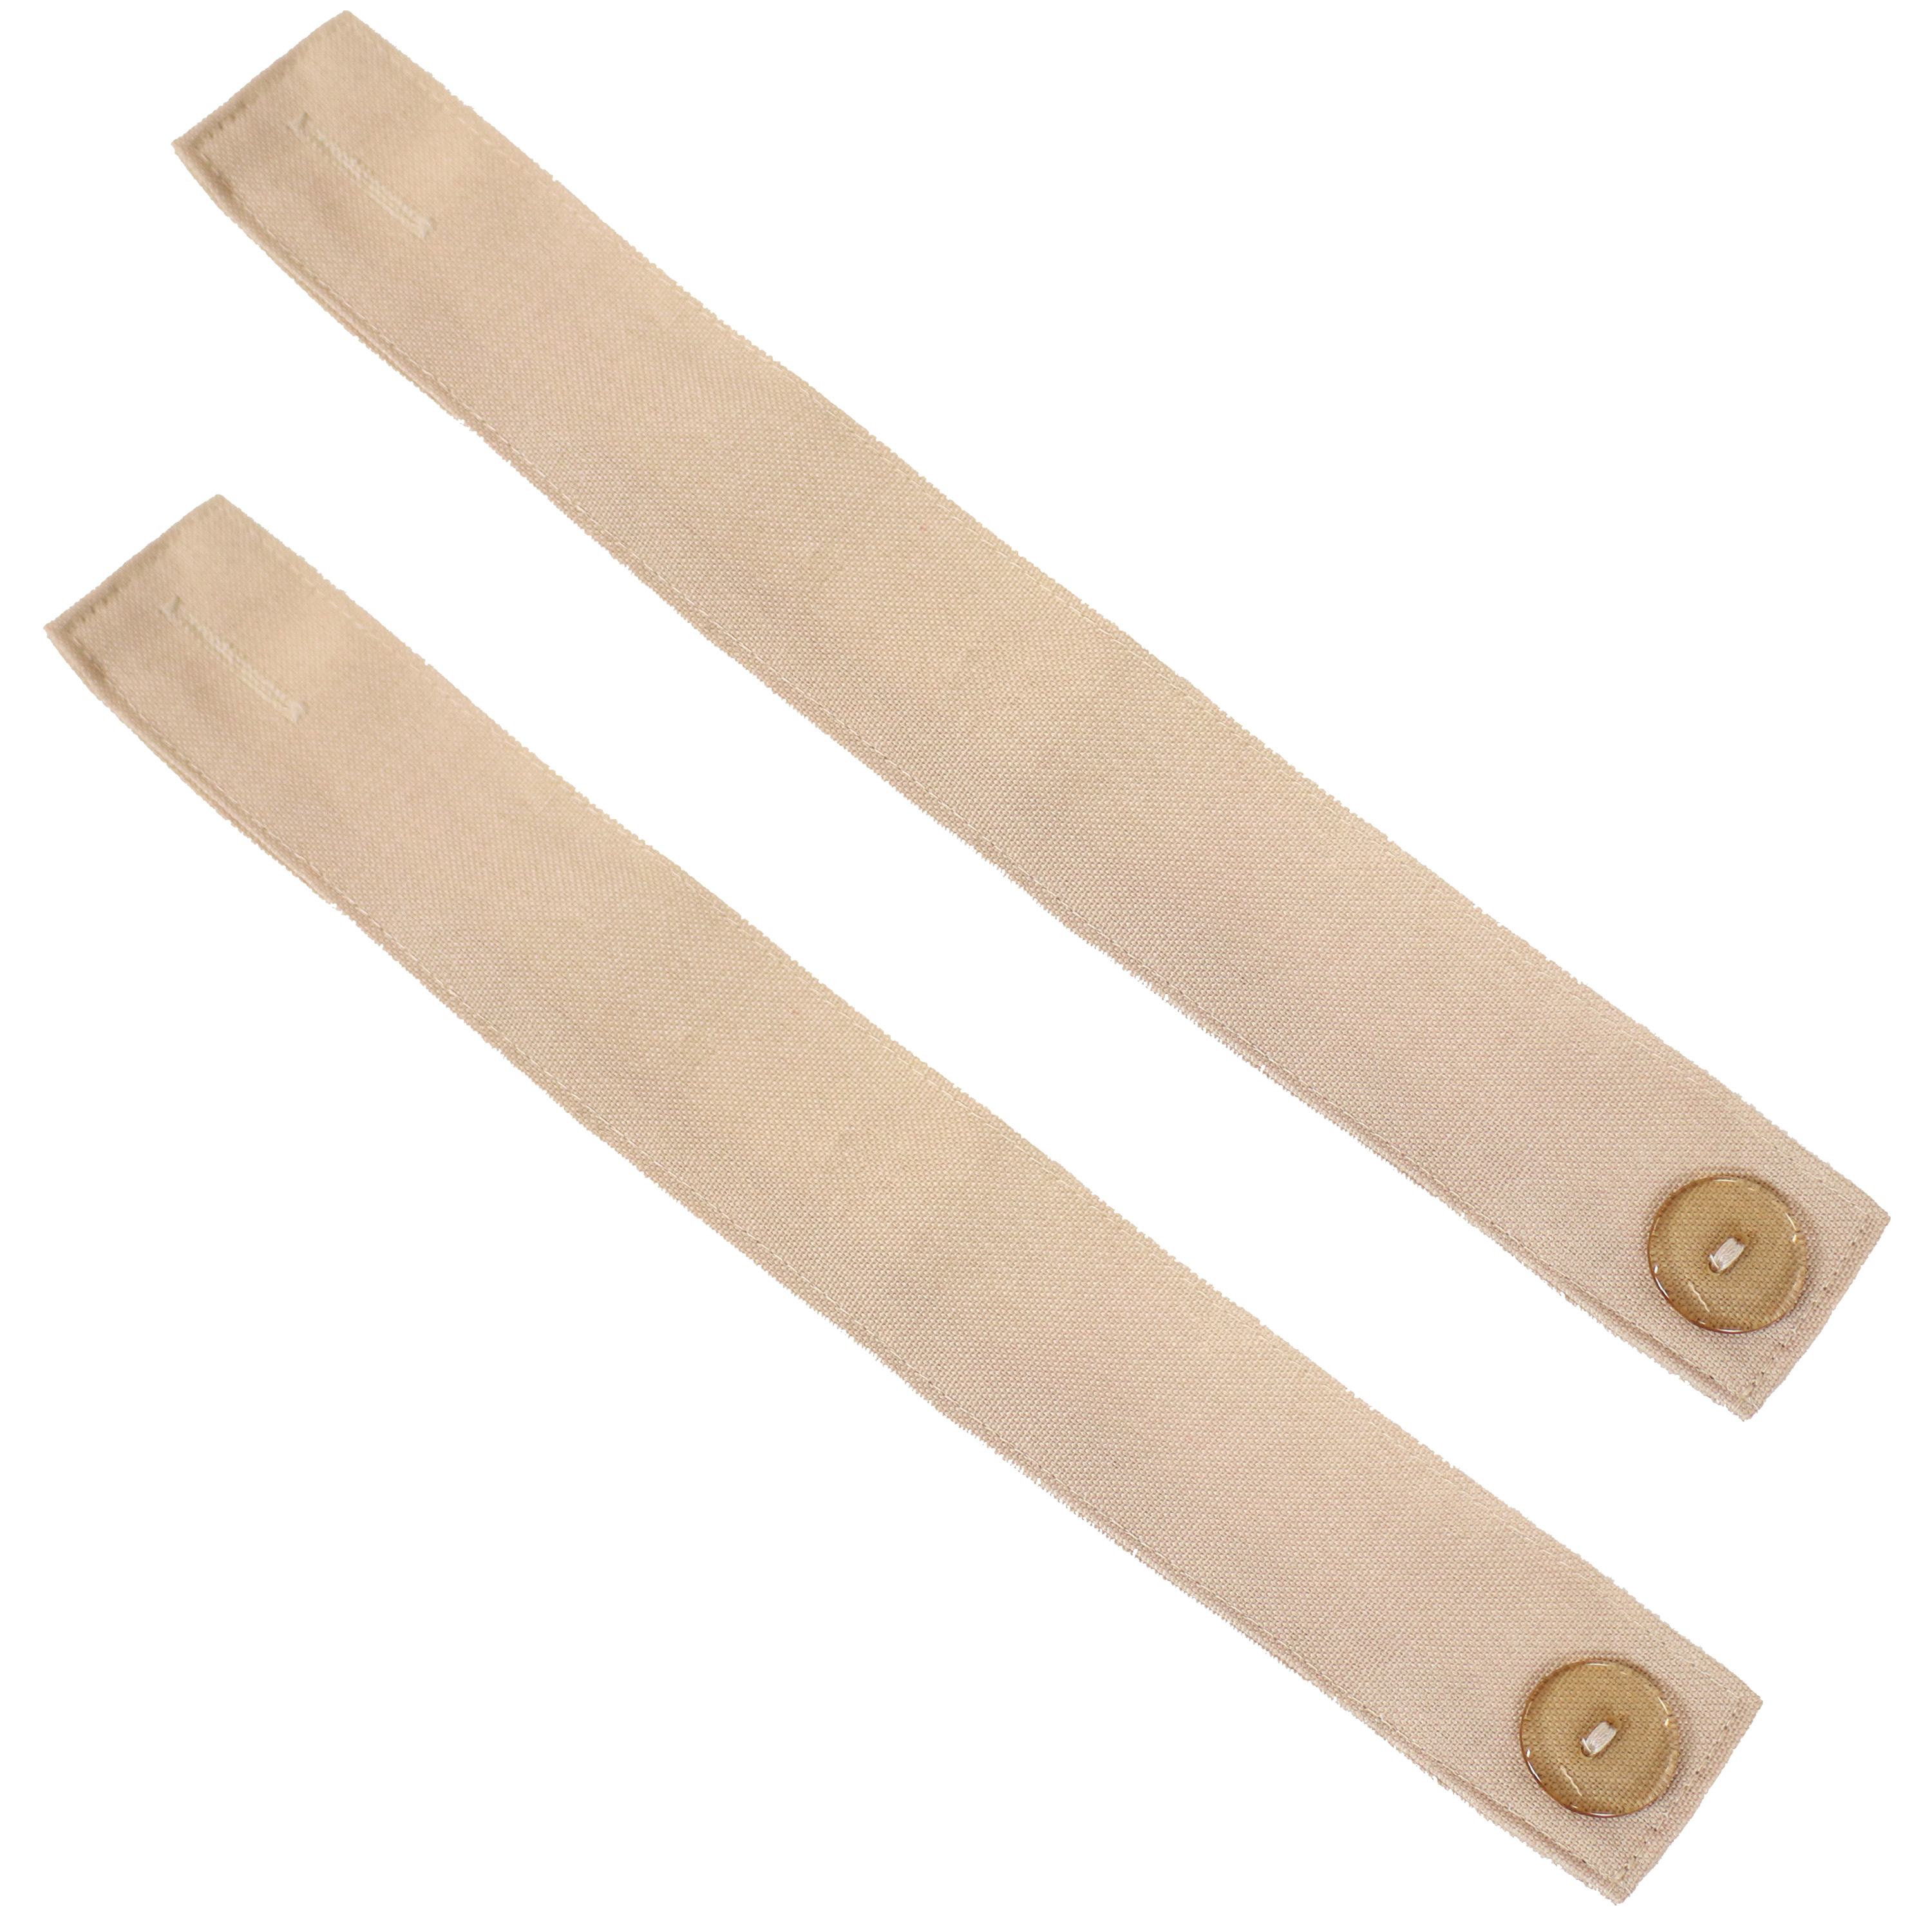 2 Fabric Curtain Tiebacks with Buttons - Beige